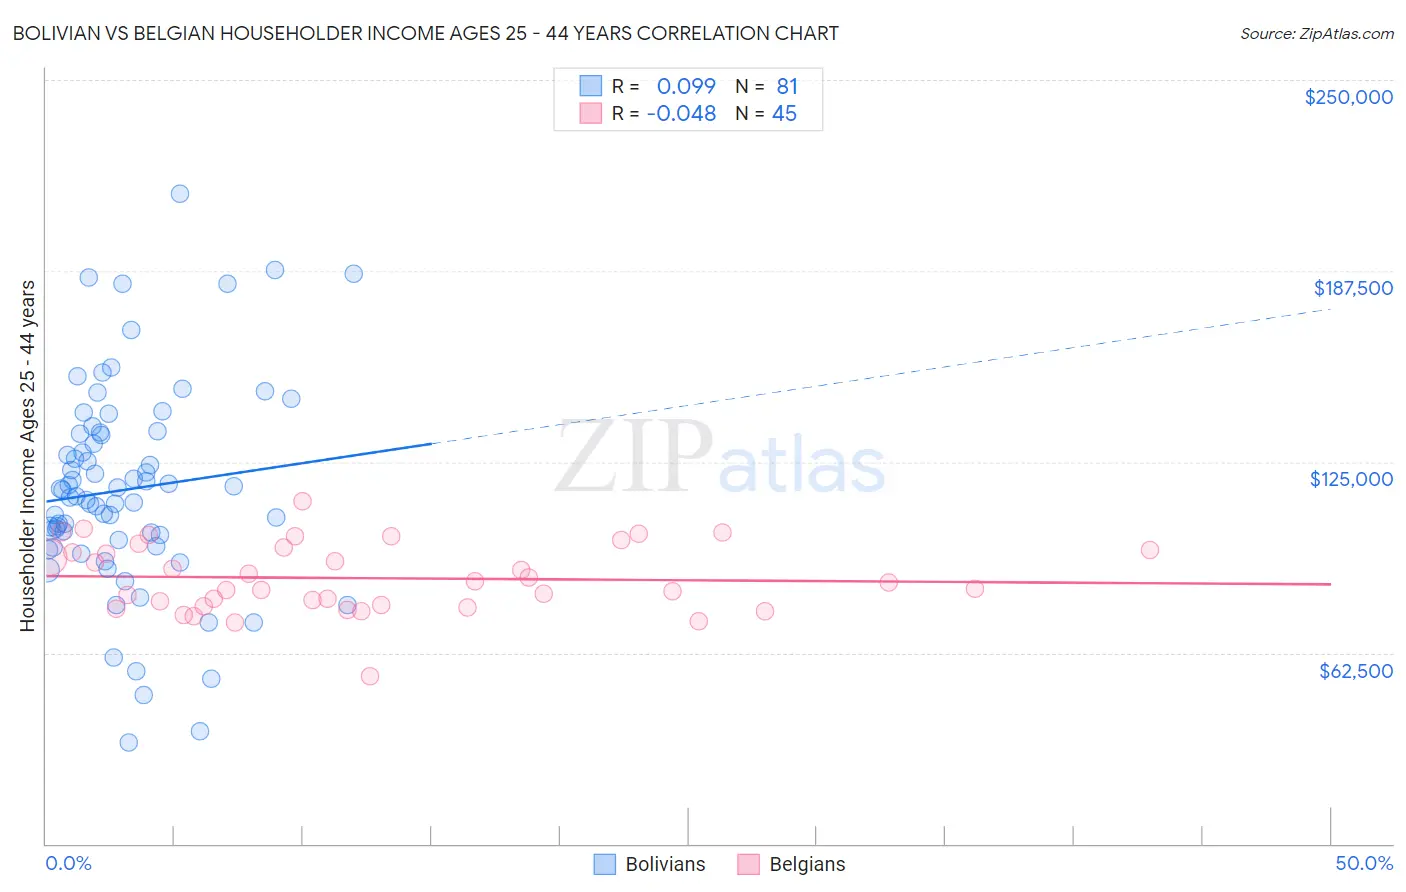 Bolivian vs Belgian Householder Income Ages 25 - 44 years